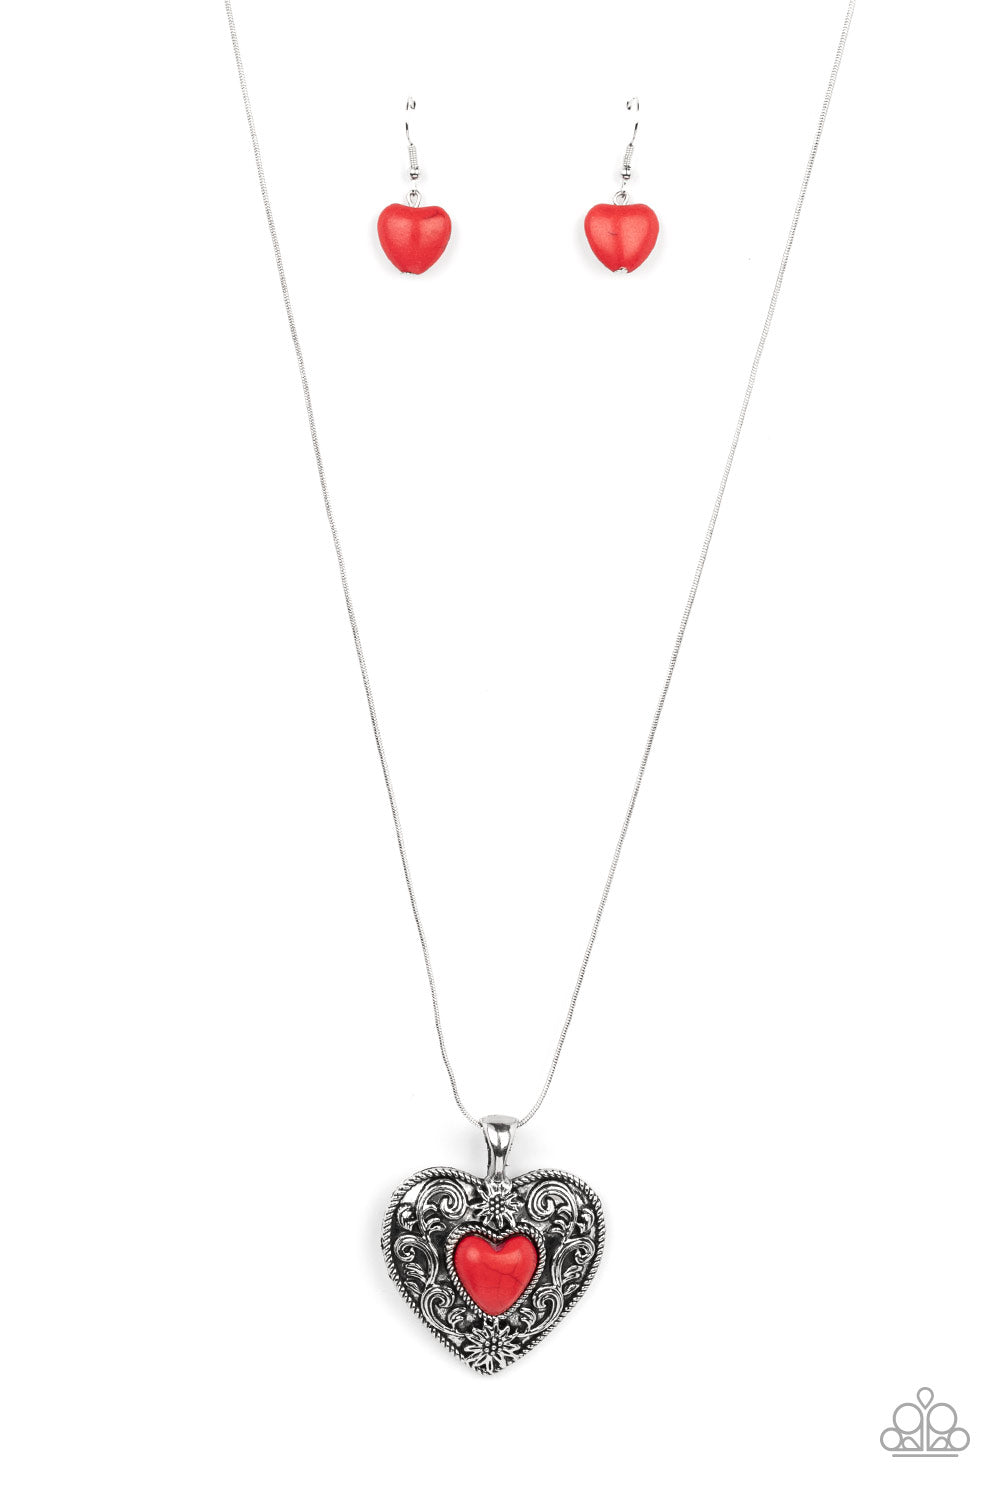 Wholeheartedly Whimsical Necklace (Red, White, Black)